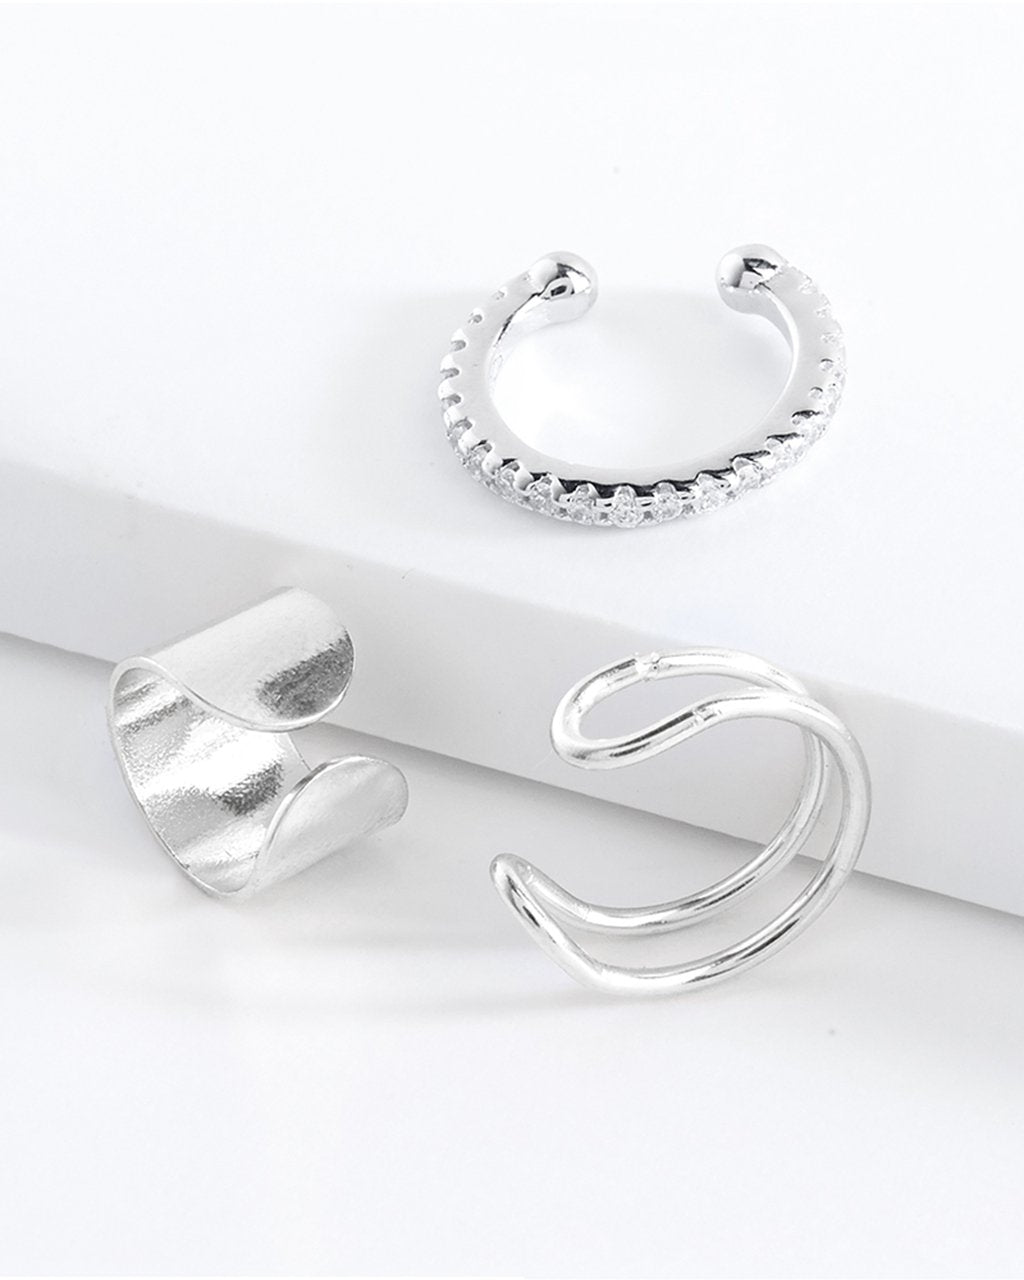 Simple Ear Cuff Set of 3 - Sterling Forever